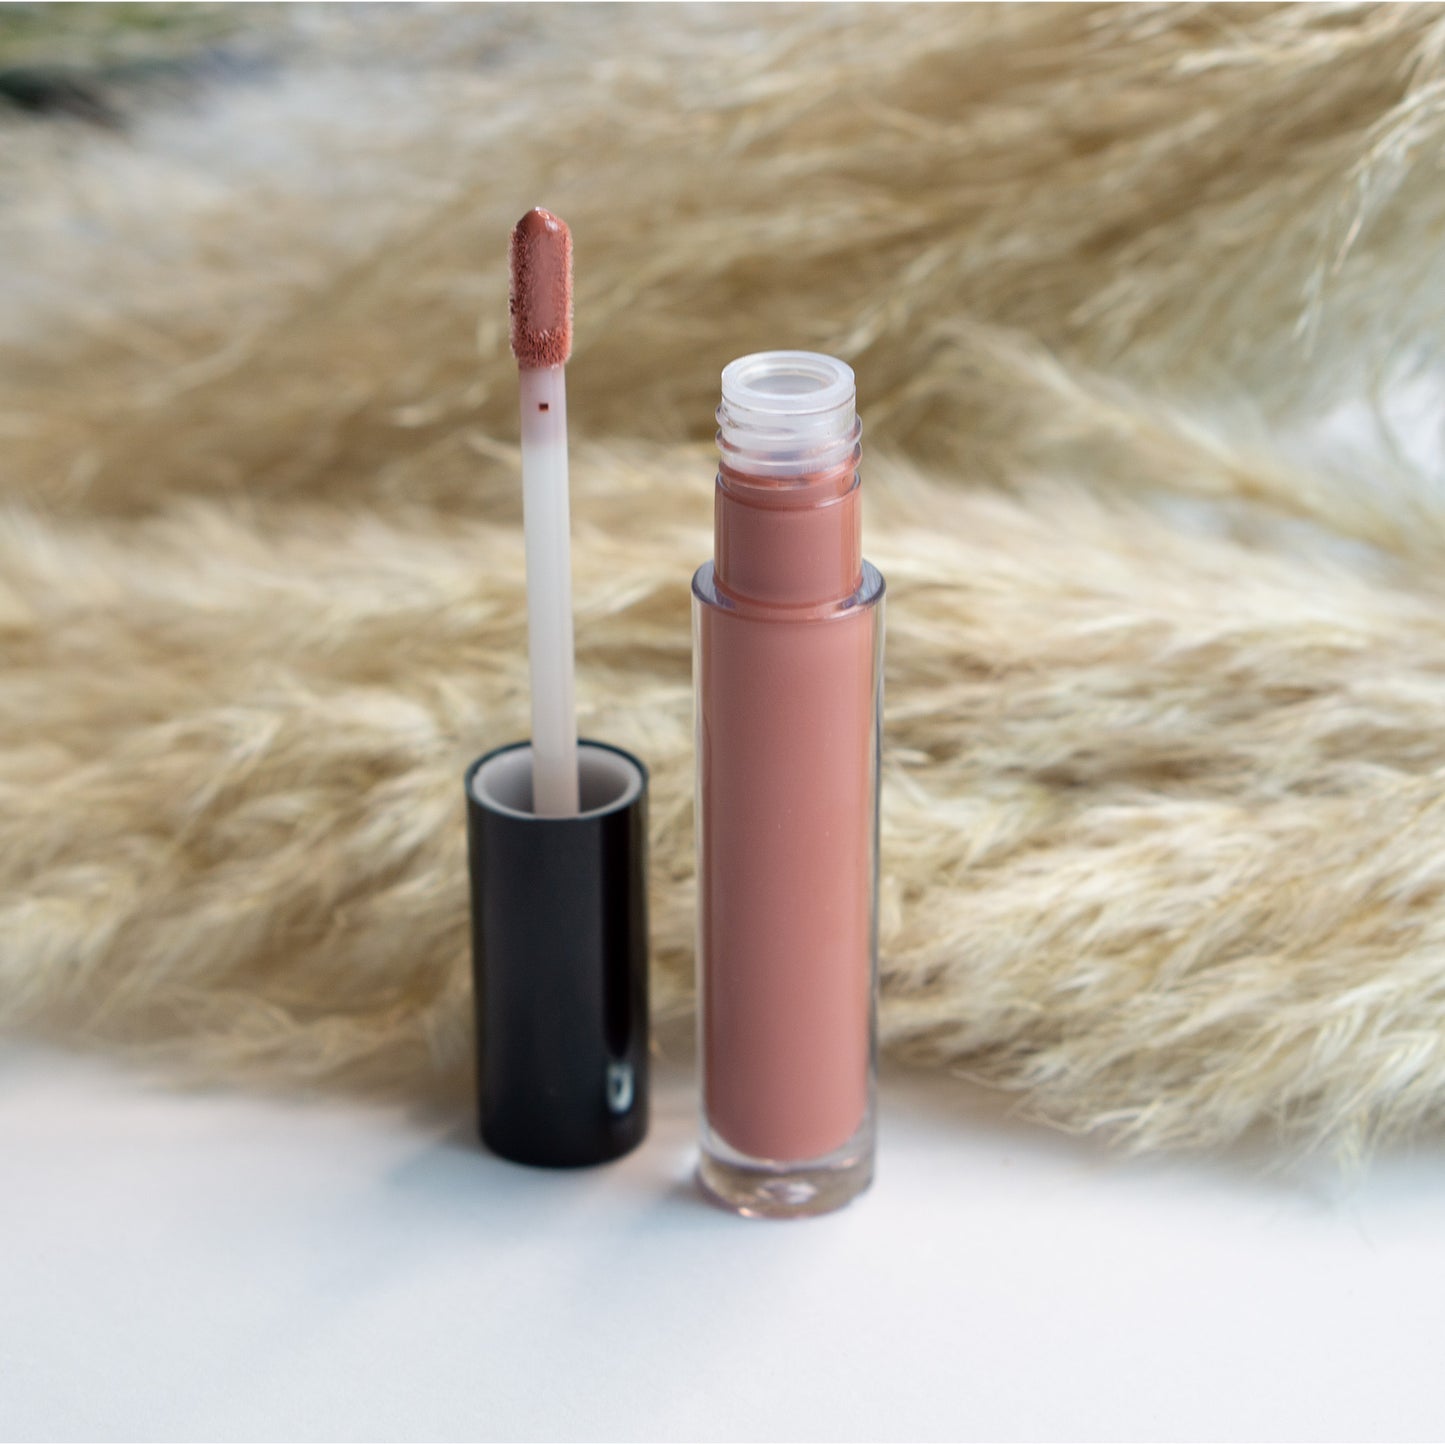 Experience a wild adventure with Wild Thing Lip Gloss from Cruisin Organics. Our liquid gloss adds a luminous shine, making your lips fuller and more defined. Perfect for taking your island retreat to the next level!